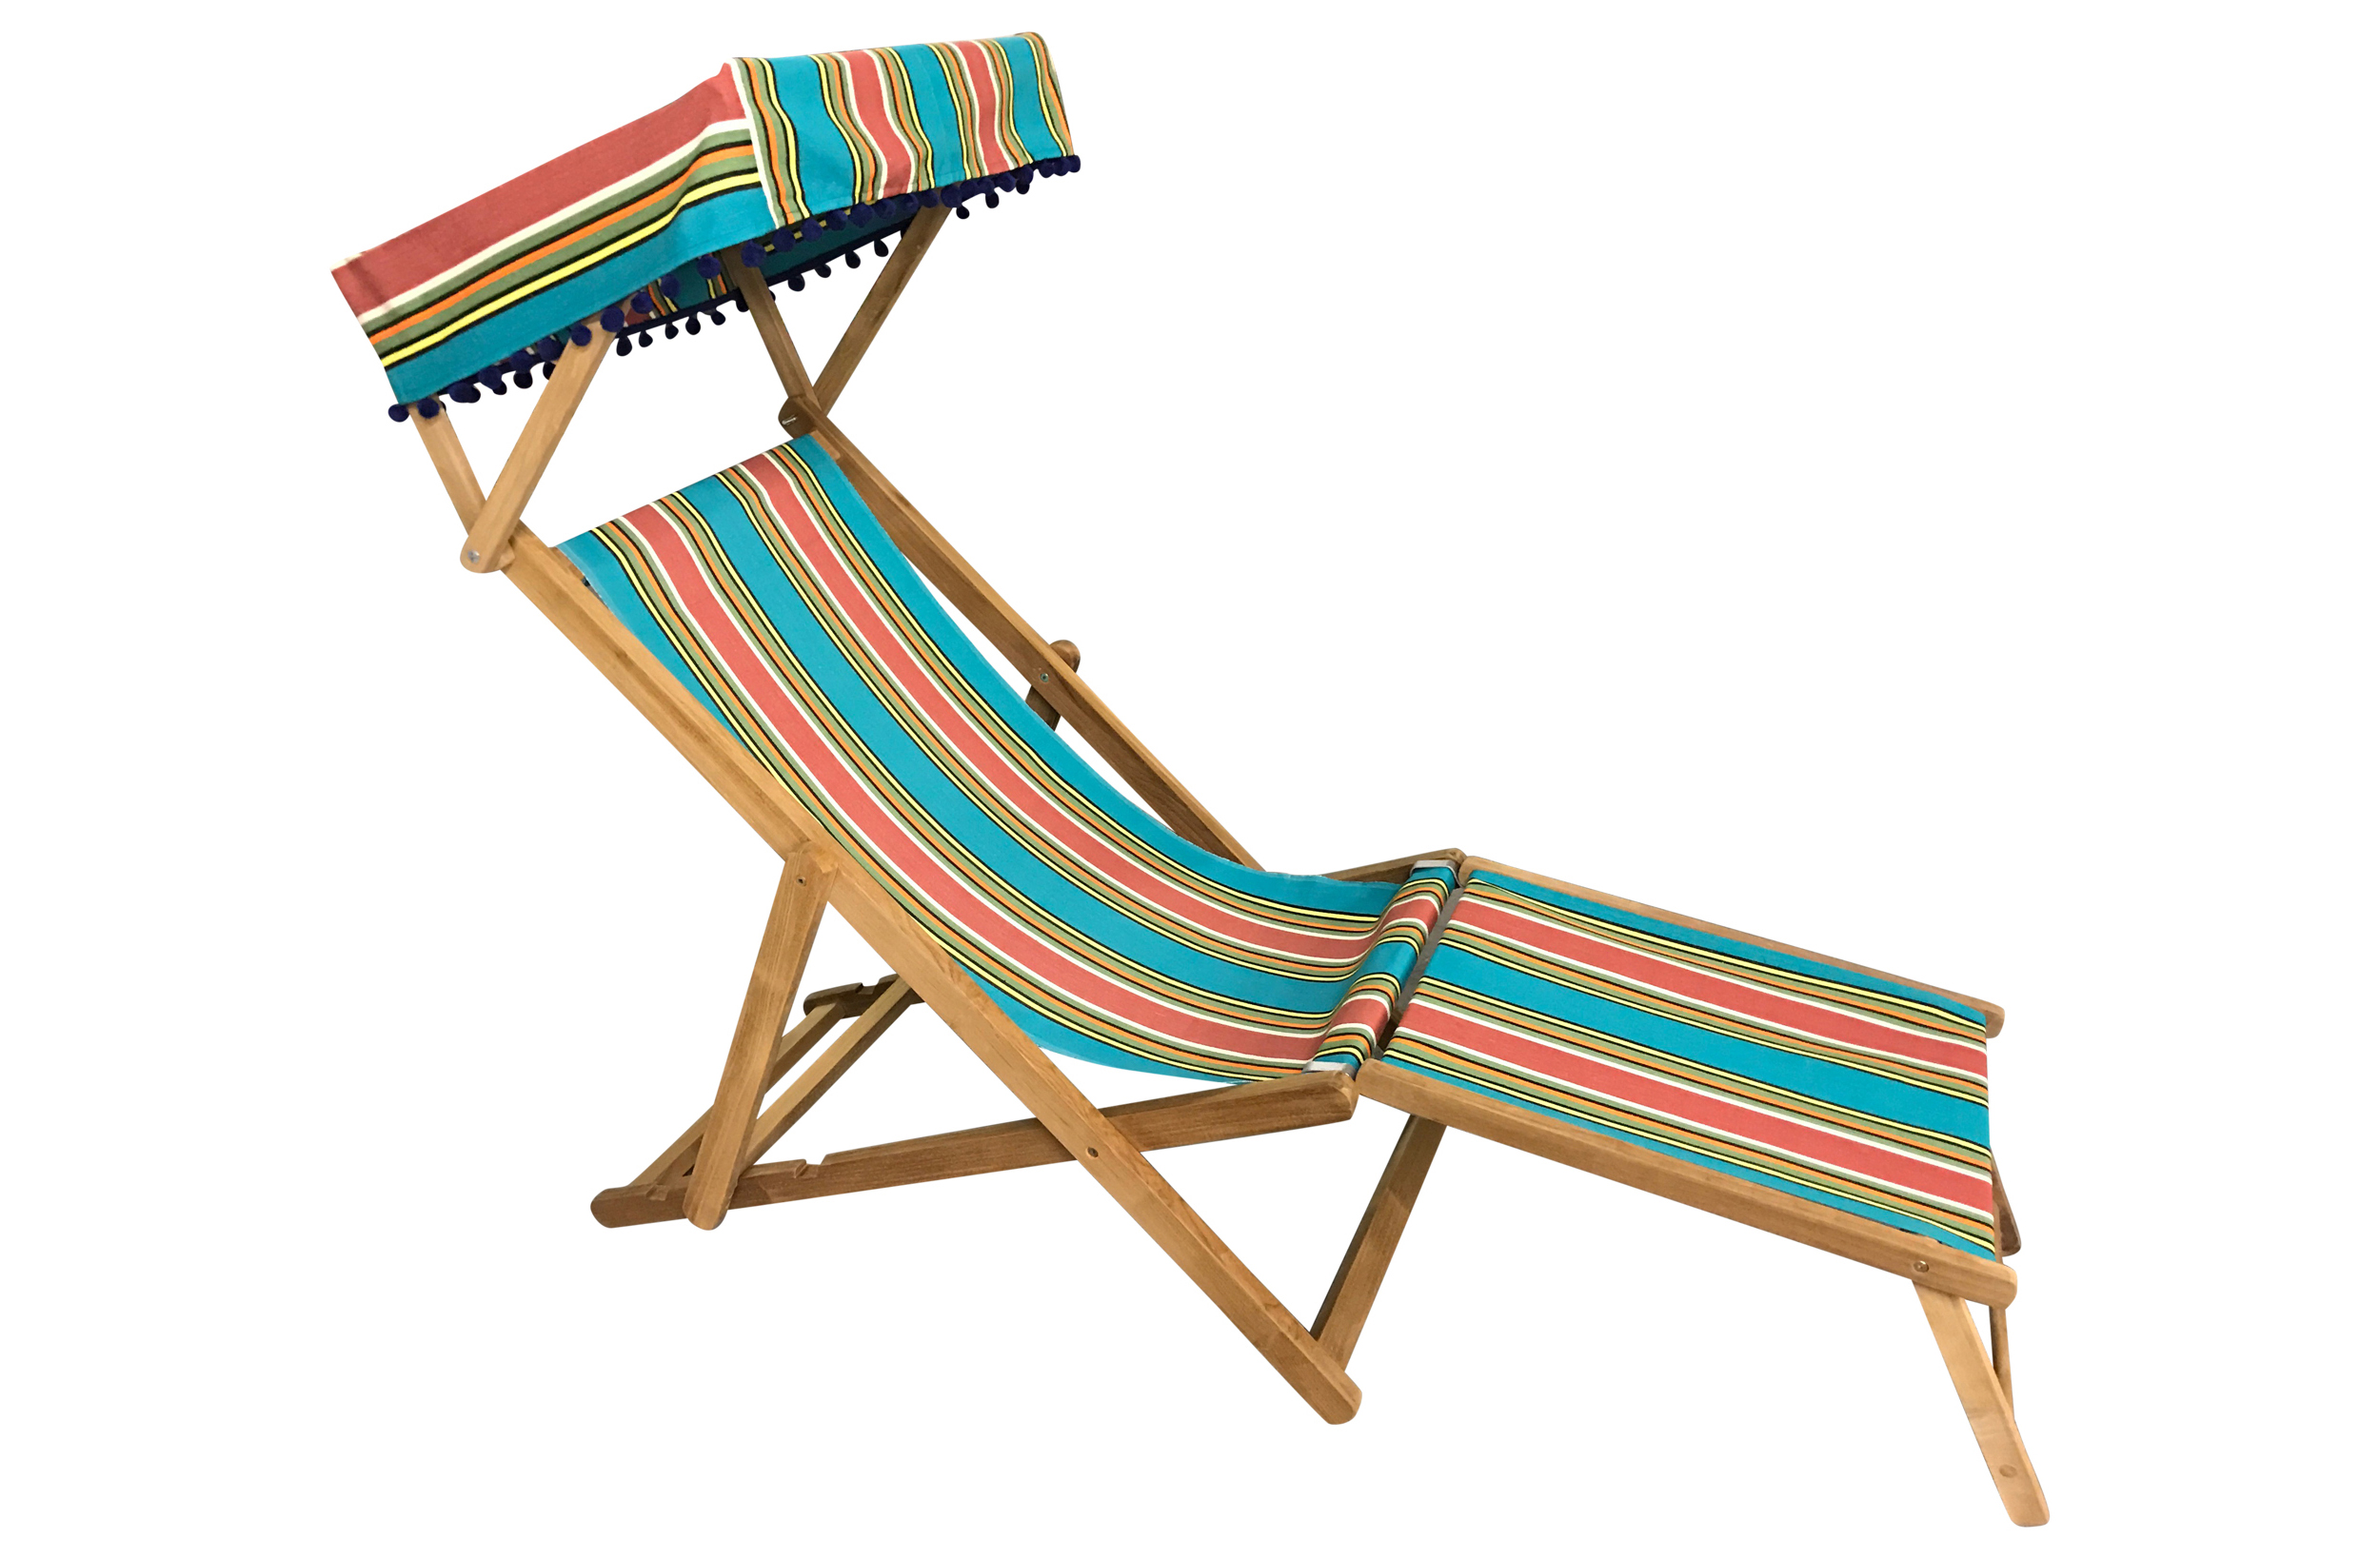 Turquoise, Terracotta and Green stripe Edwardian Deckchair with Canopy and Footstool